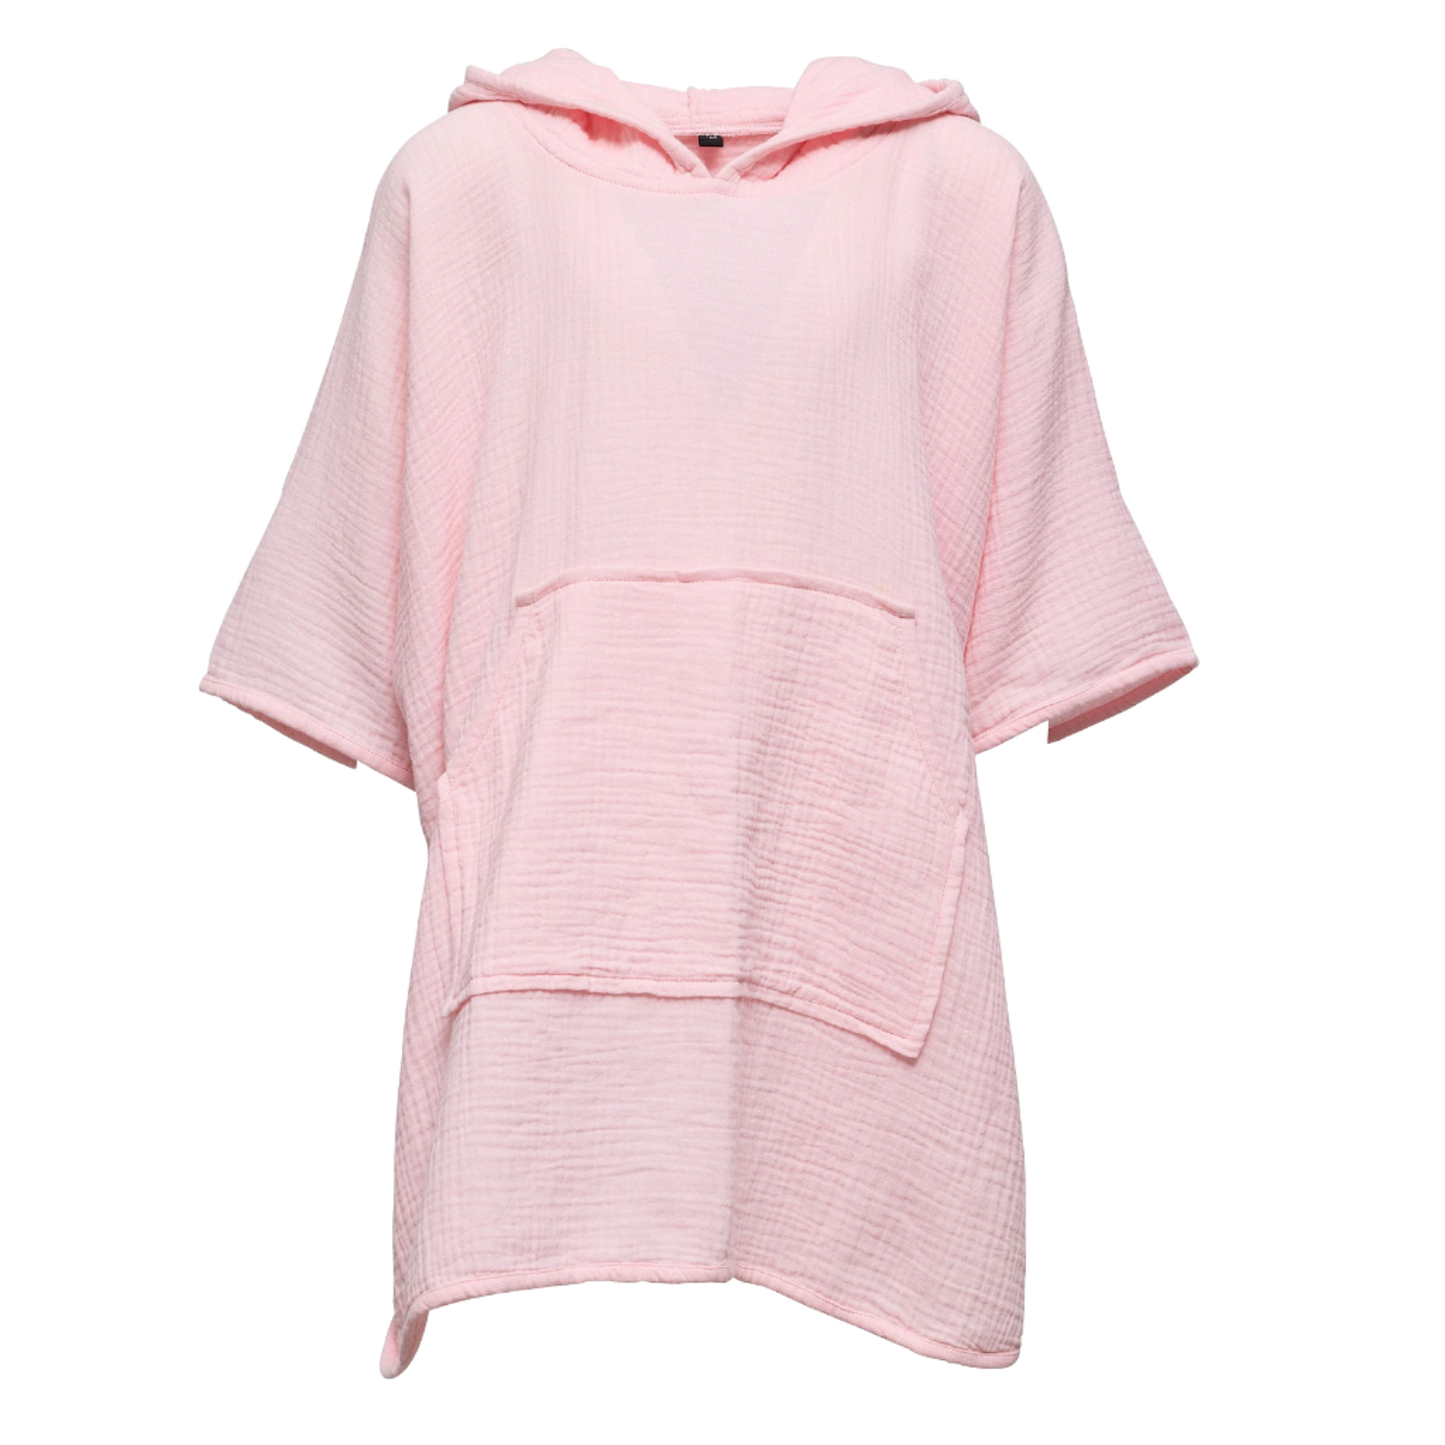 Snapper Rock Beach Poncho - Sunset Pink